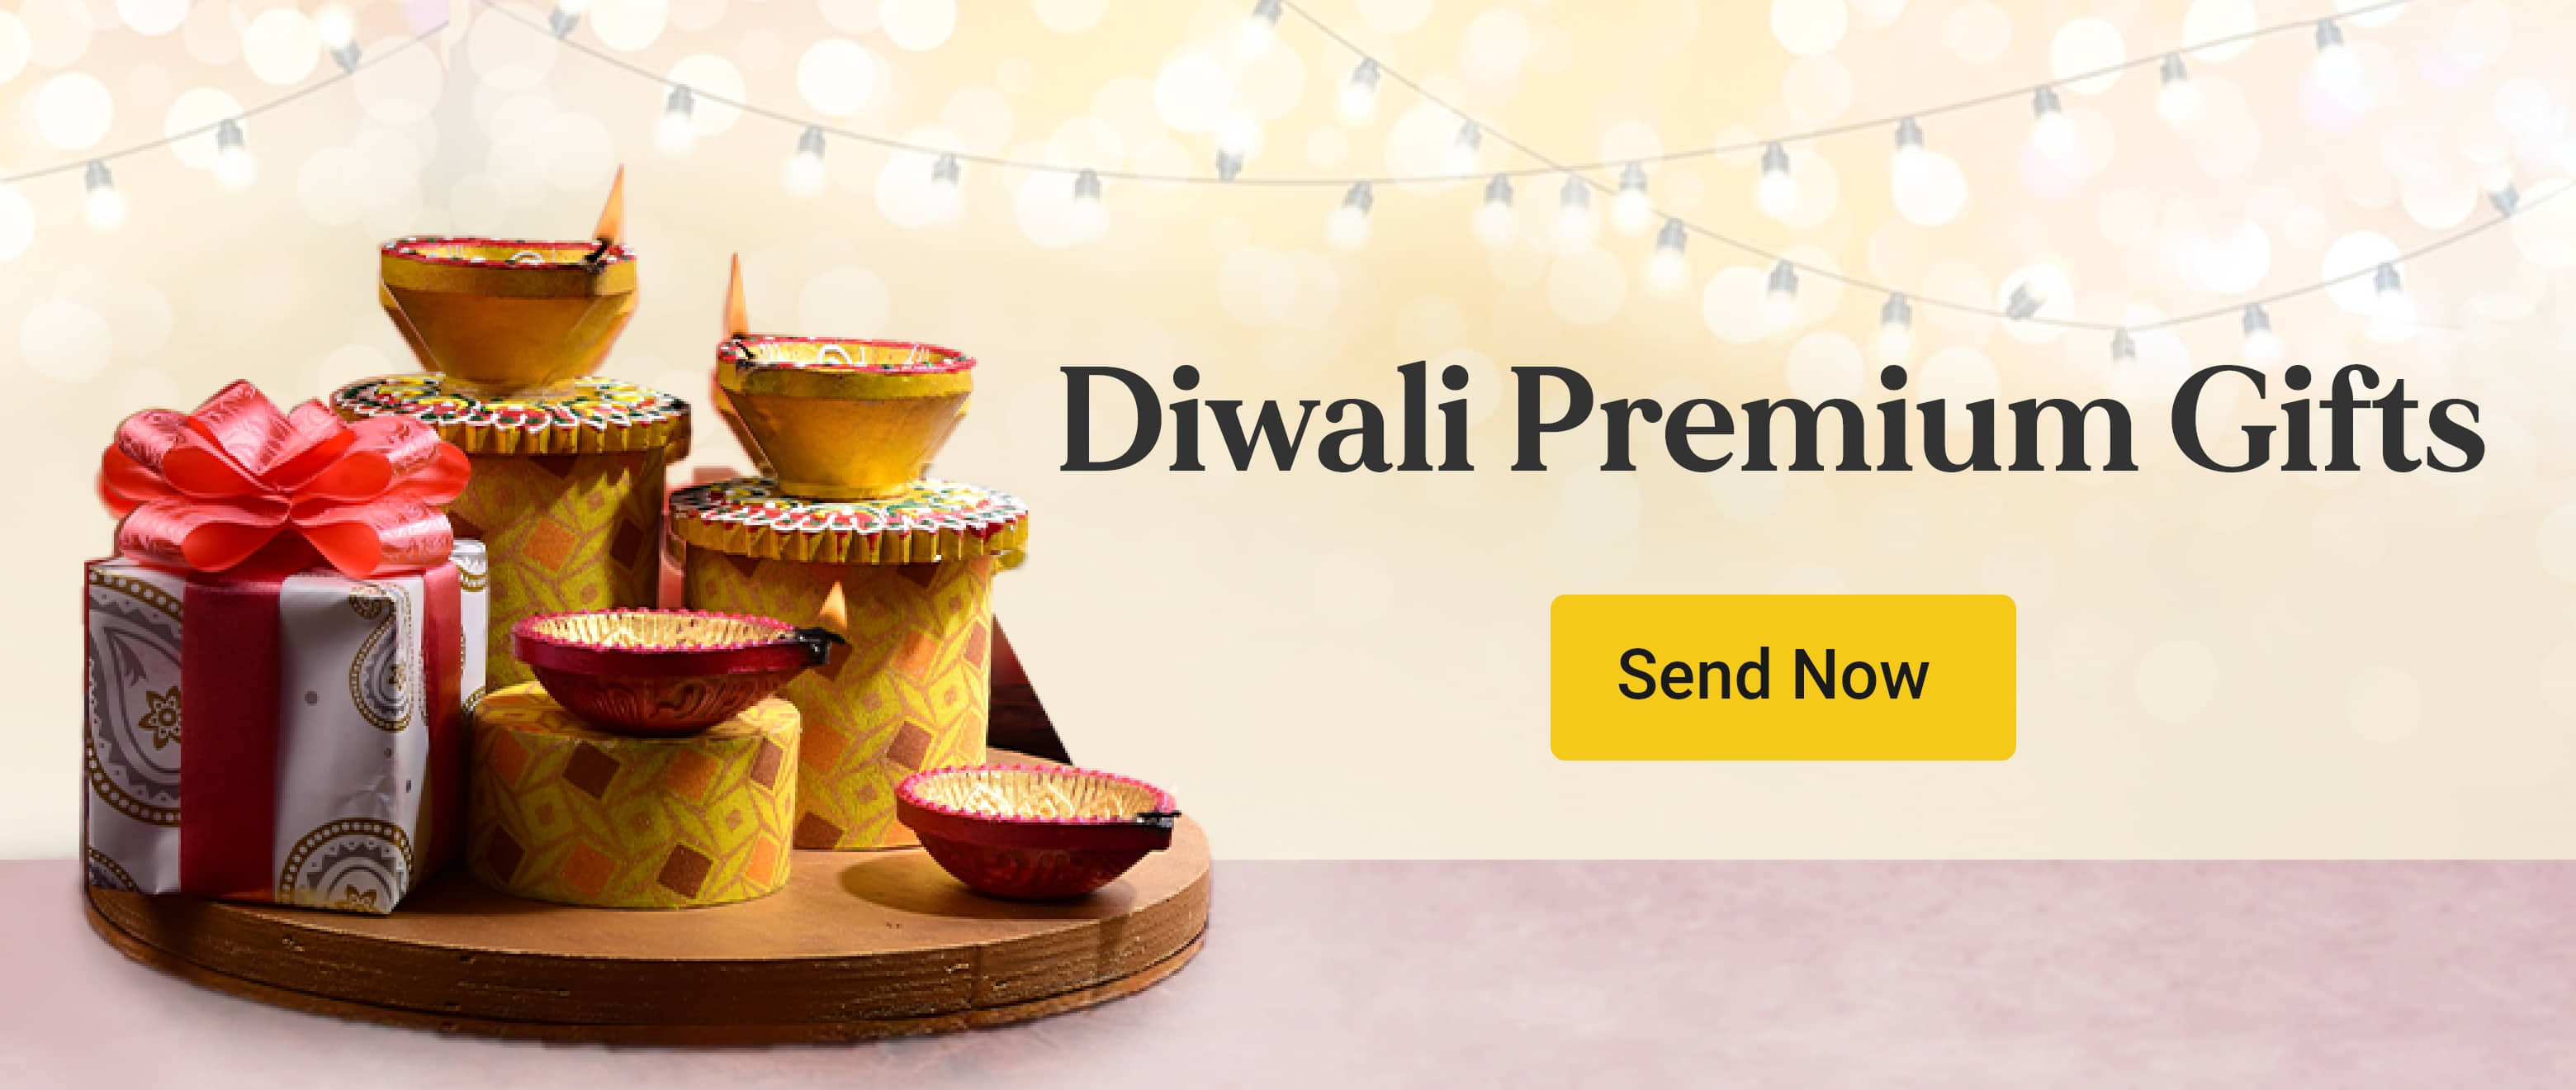 Corporate Diwali Gifts: Corporate Diwali Gifts Ideas for Employees & Co  Workers